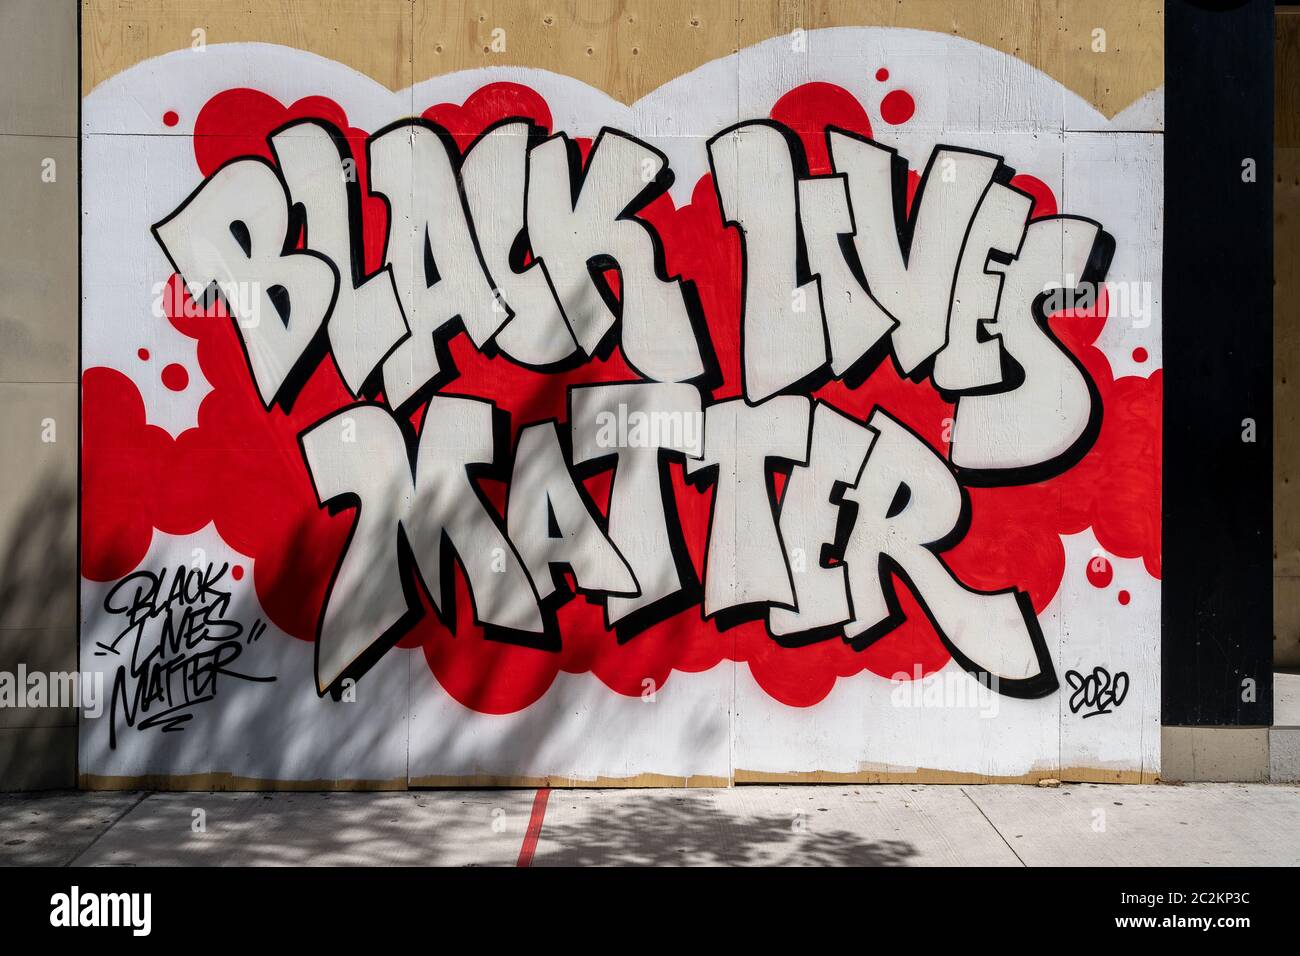 Boarded up storefront in Downtown Toronto showing Black Lives Matter message painted out front in support of social movement against racial injustice. Stock Photo